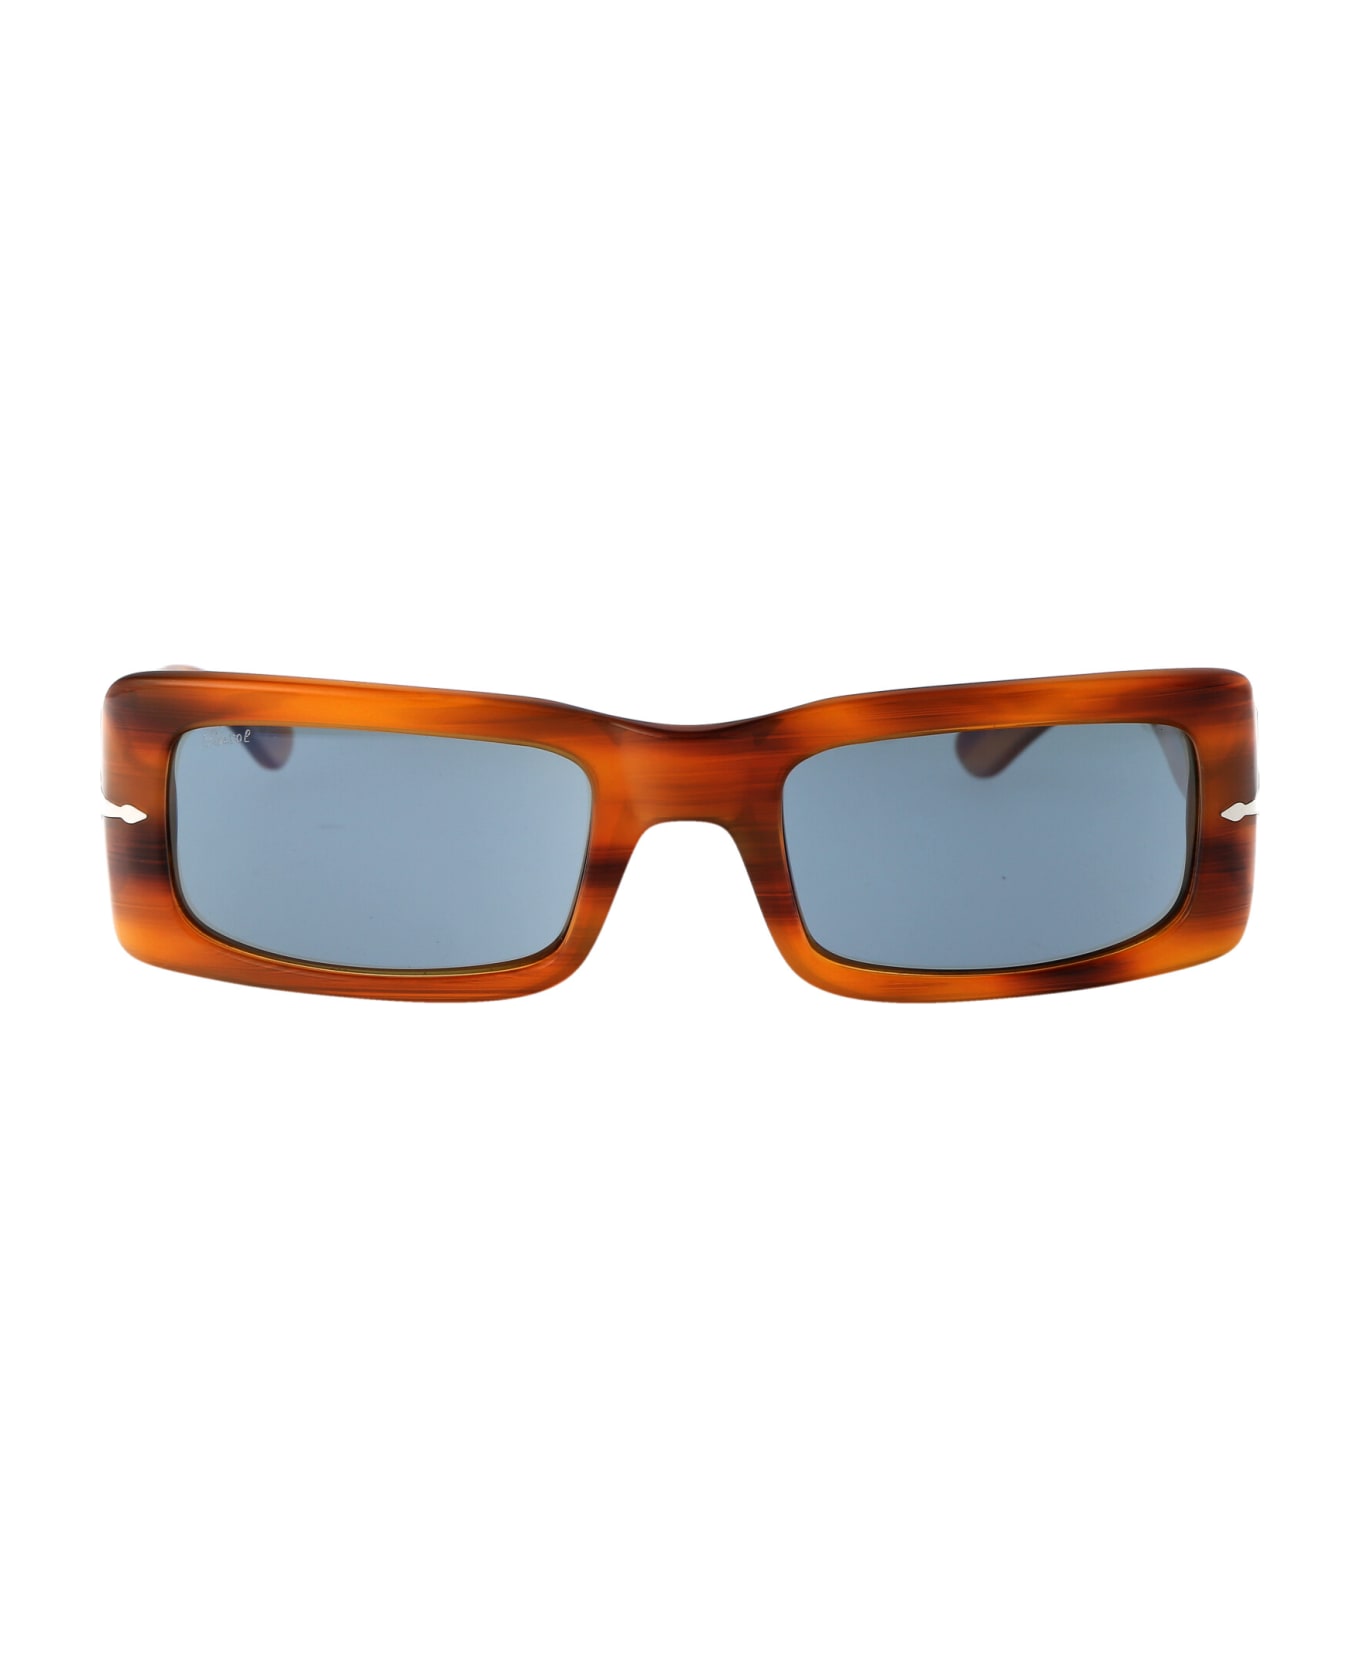 Persol Francis Sunglasses - 960/56 STRIPED BROWN サングラス